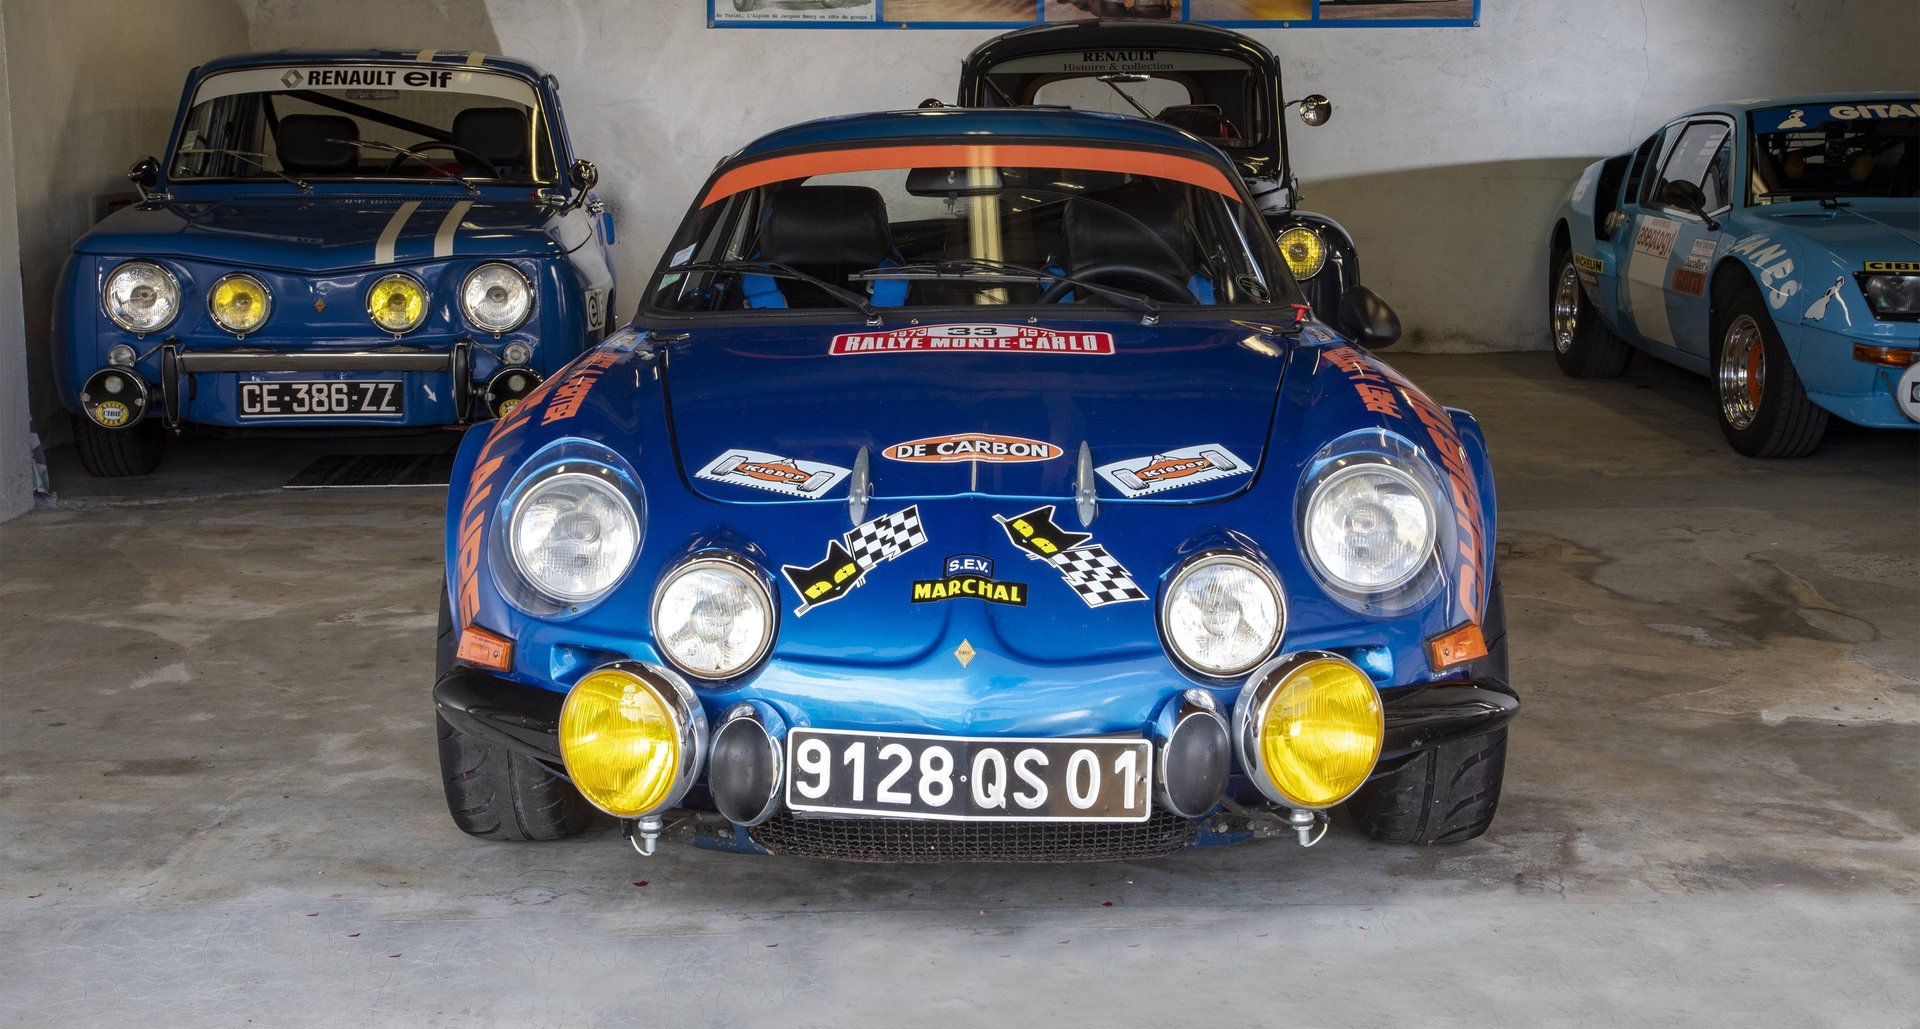 Ready to retrace some of rallying's greatest moments in this Renault Alpine  A110?